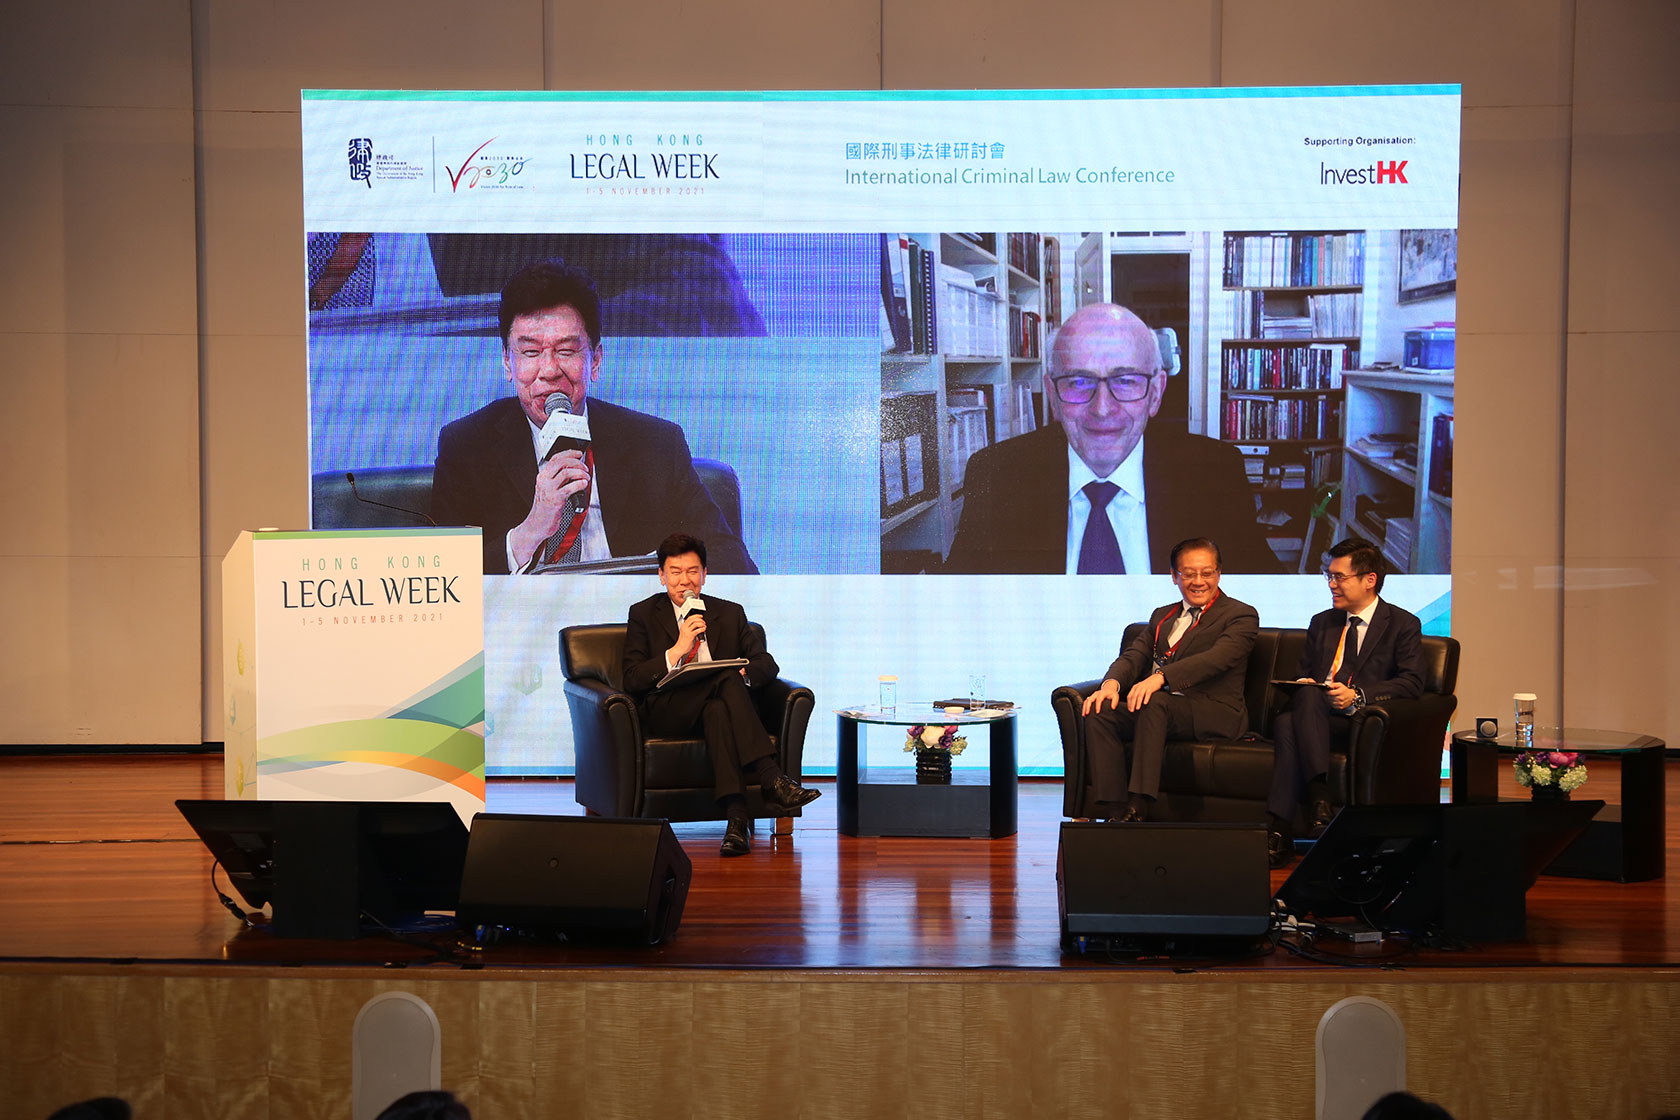 At the International Criminal Law Conference under Hong Kong Legal Week 2021 held today (November 2), four topics had been chosen for discussion. Photo shows former President of the Law Society of Hong Kong Mr Stephen Hung (first left), Mr Joseph Tse, SC (second right), and Deputy Director of Public Prosecution (Acting) Mr Anthony Chau (first right) exchanging views via video conference with Mr Jonathan Caplan, QC (third right) on crowdfunding or crime-funding? at the fourth discussion panel.